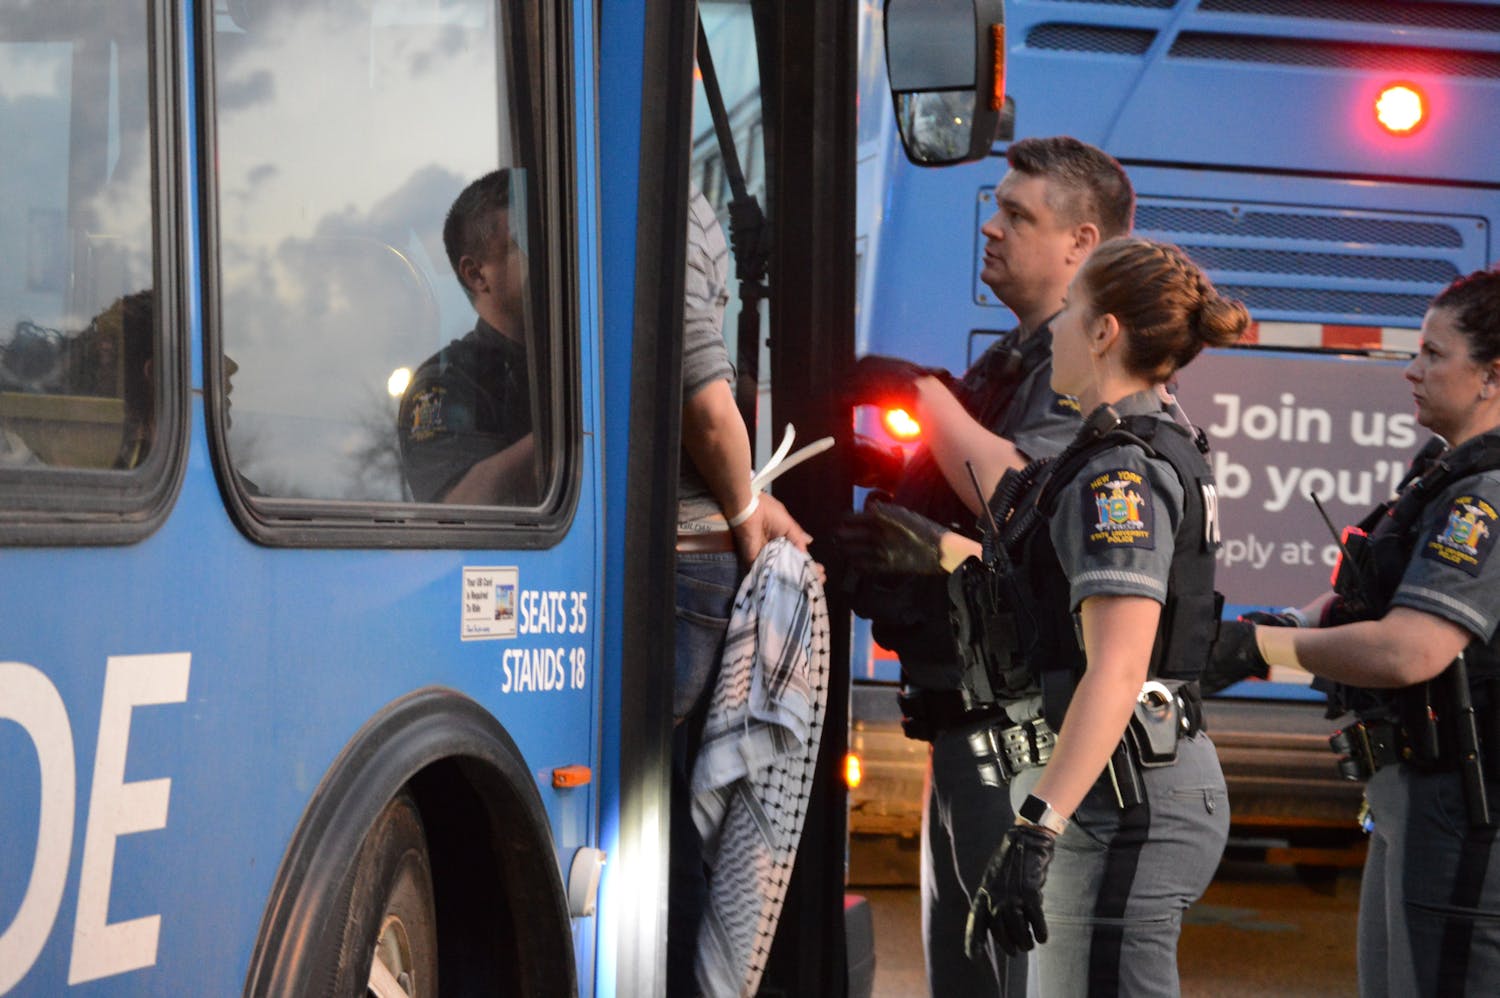 Several of the arrested protesters were transported off campus on a UB Stampede bus. About 10 demonstrators inside one bus could be heard chanting “free Palestine.”&nbsp;